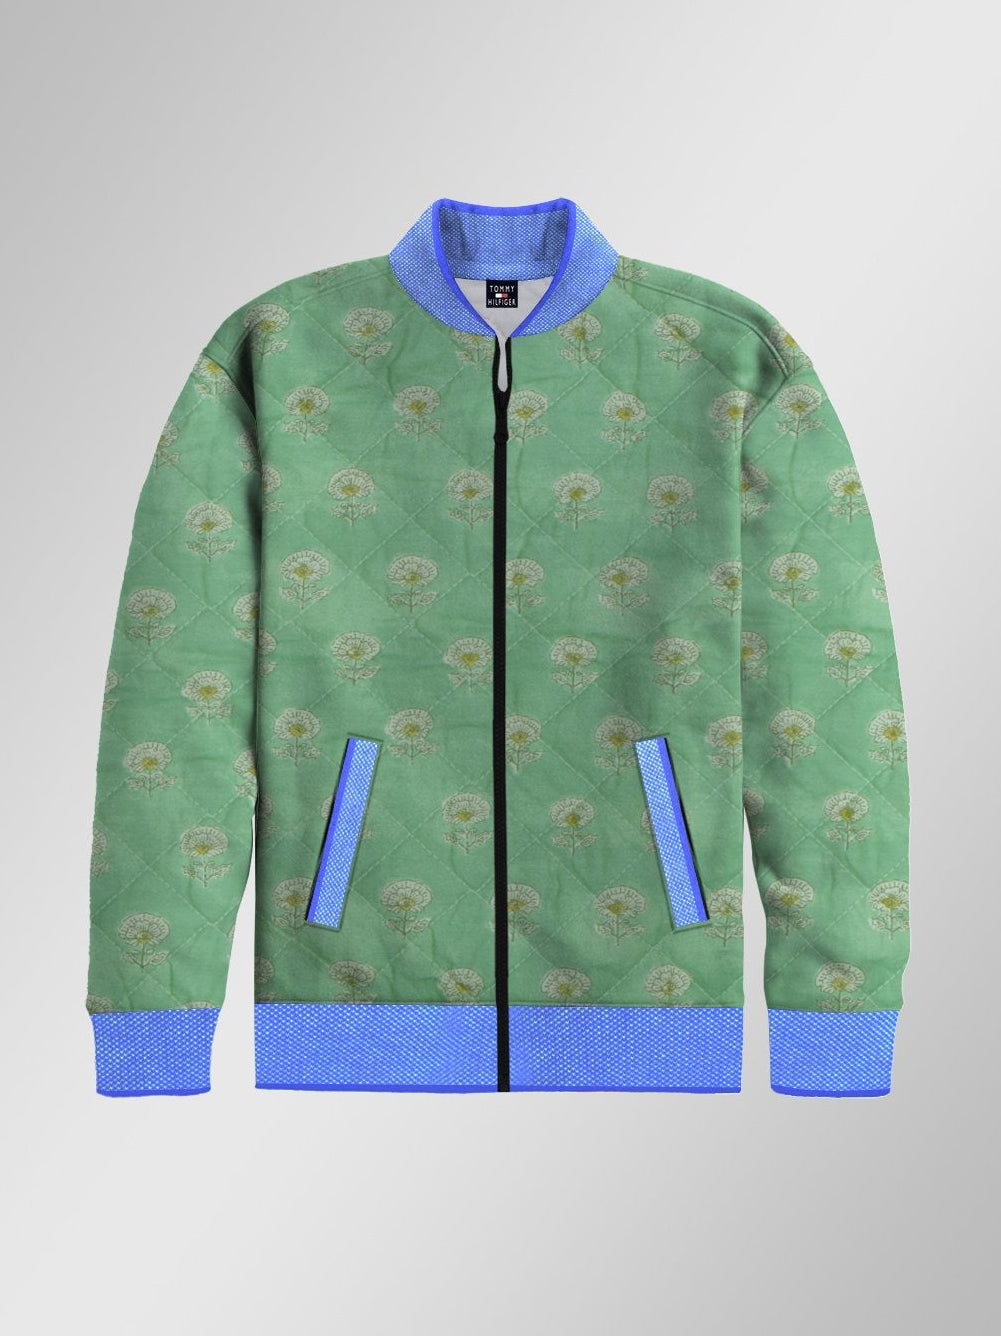 Quilted Zipper Baseball Jacket For Kids-Green & Allover Print-BE113/BR930